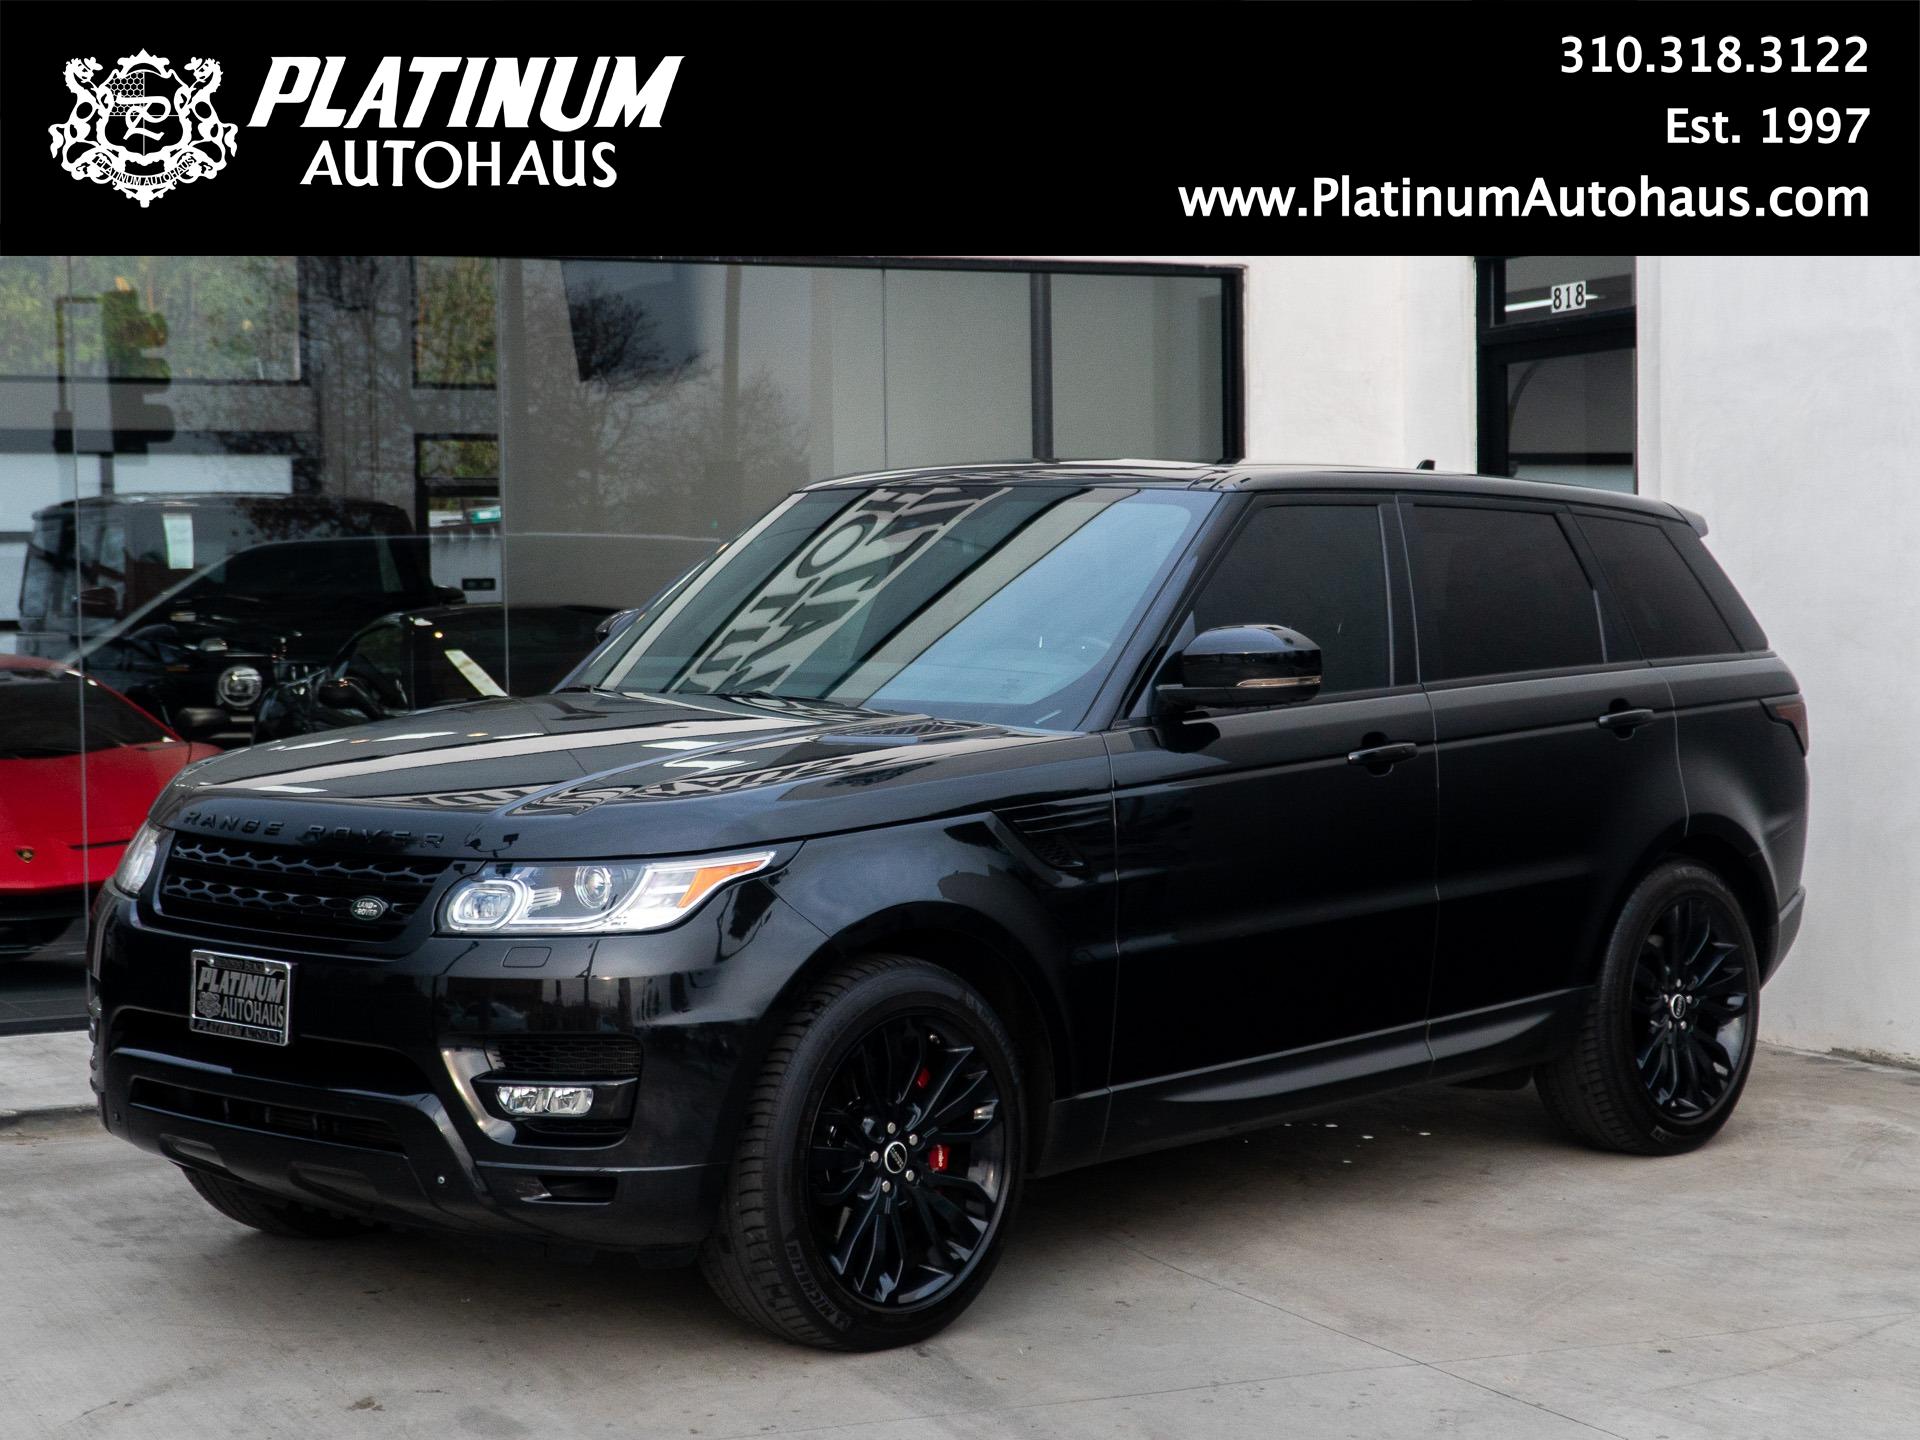 2015 Land Rover Range Rover Sport Supercharged Limited Edition Stock # 6779 for sale near Redondo Beach, CA | Rover Dealer